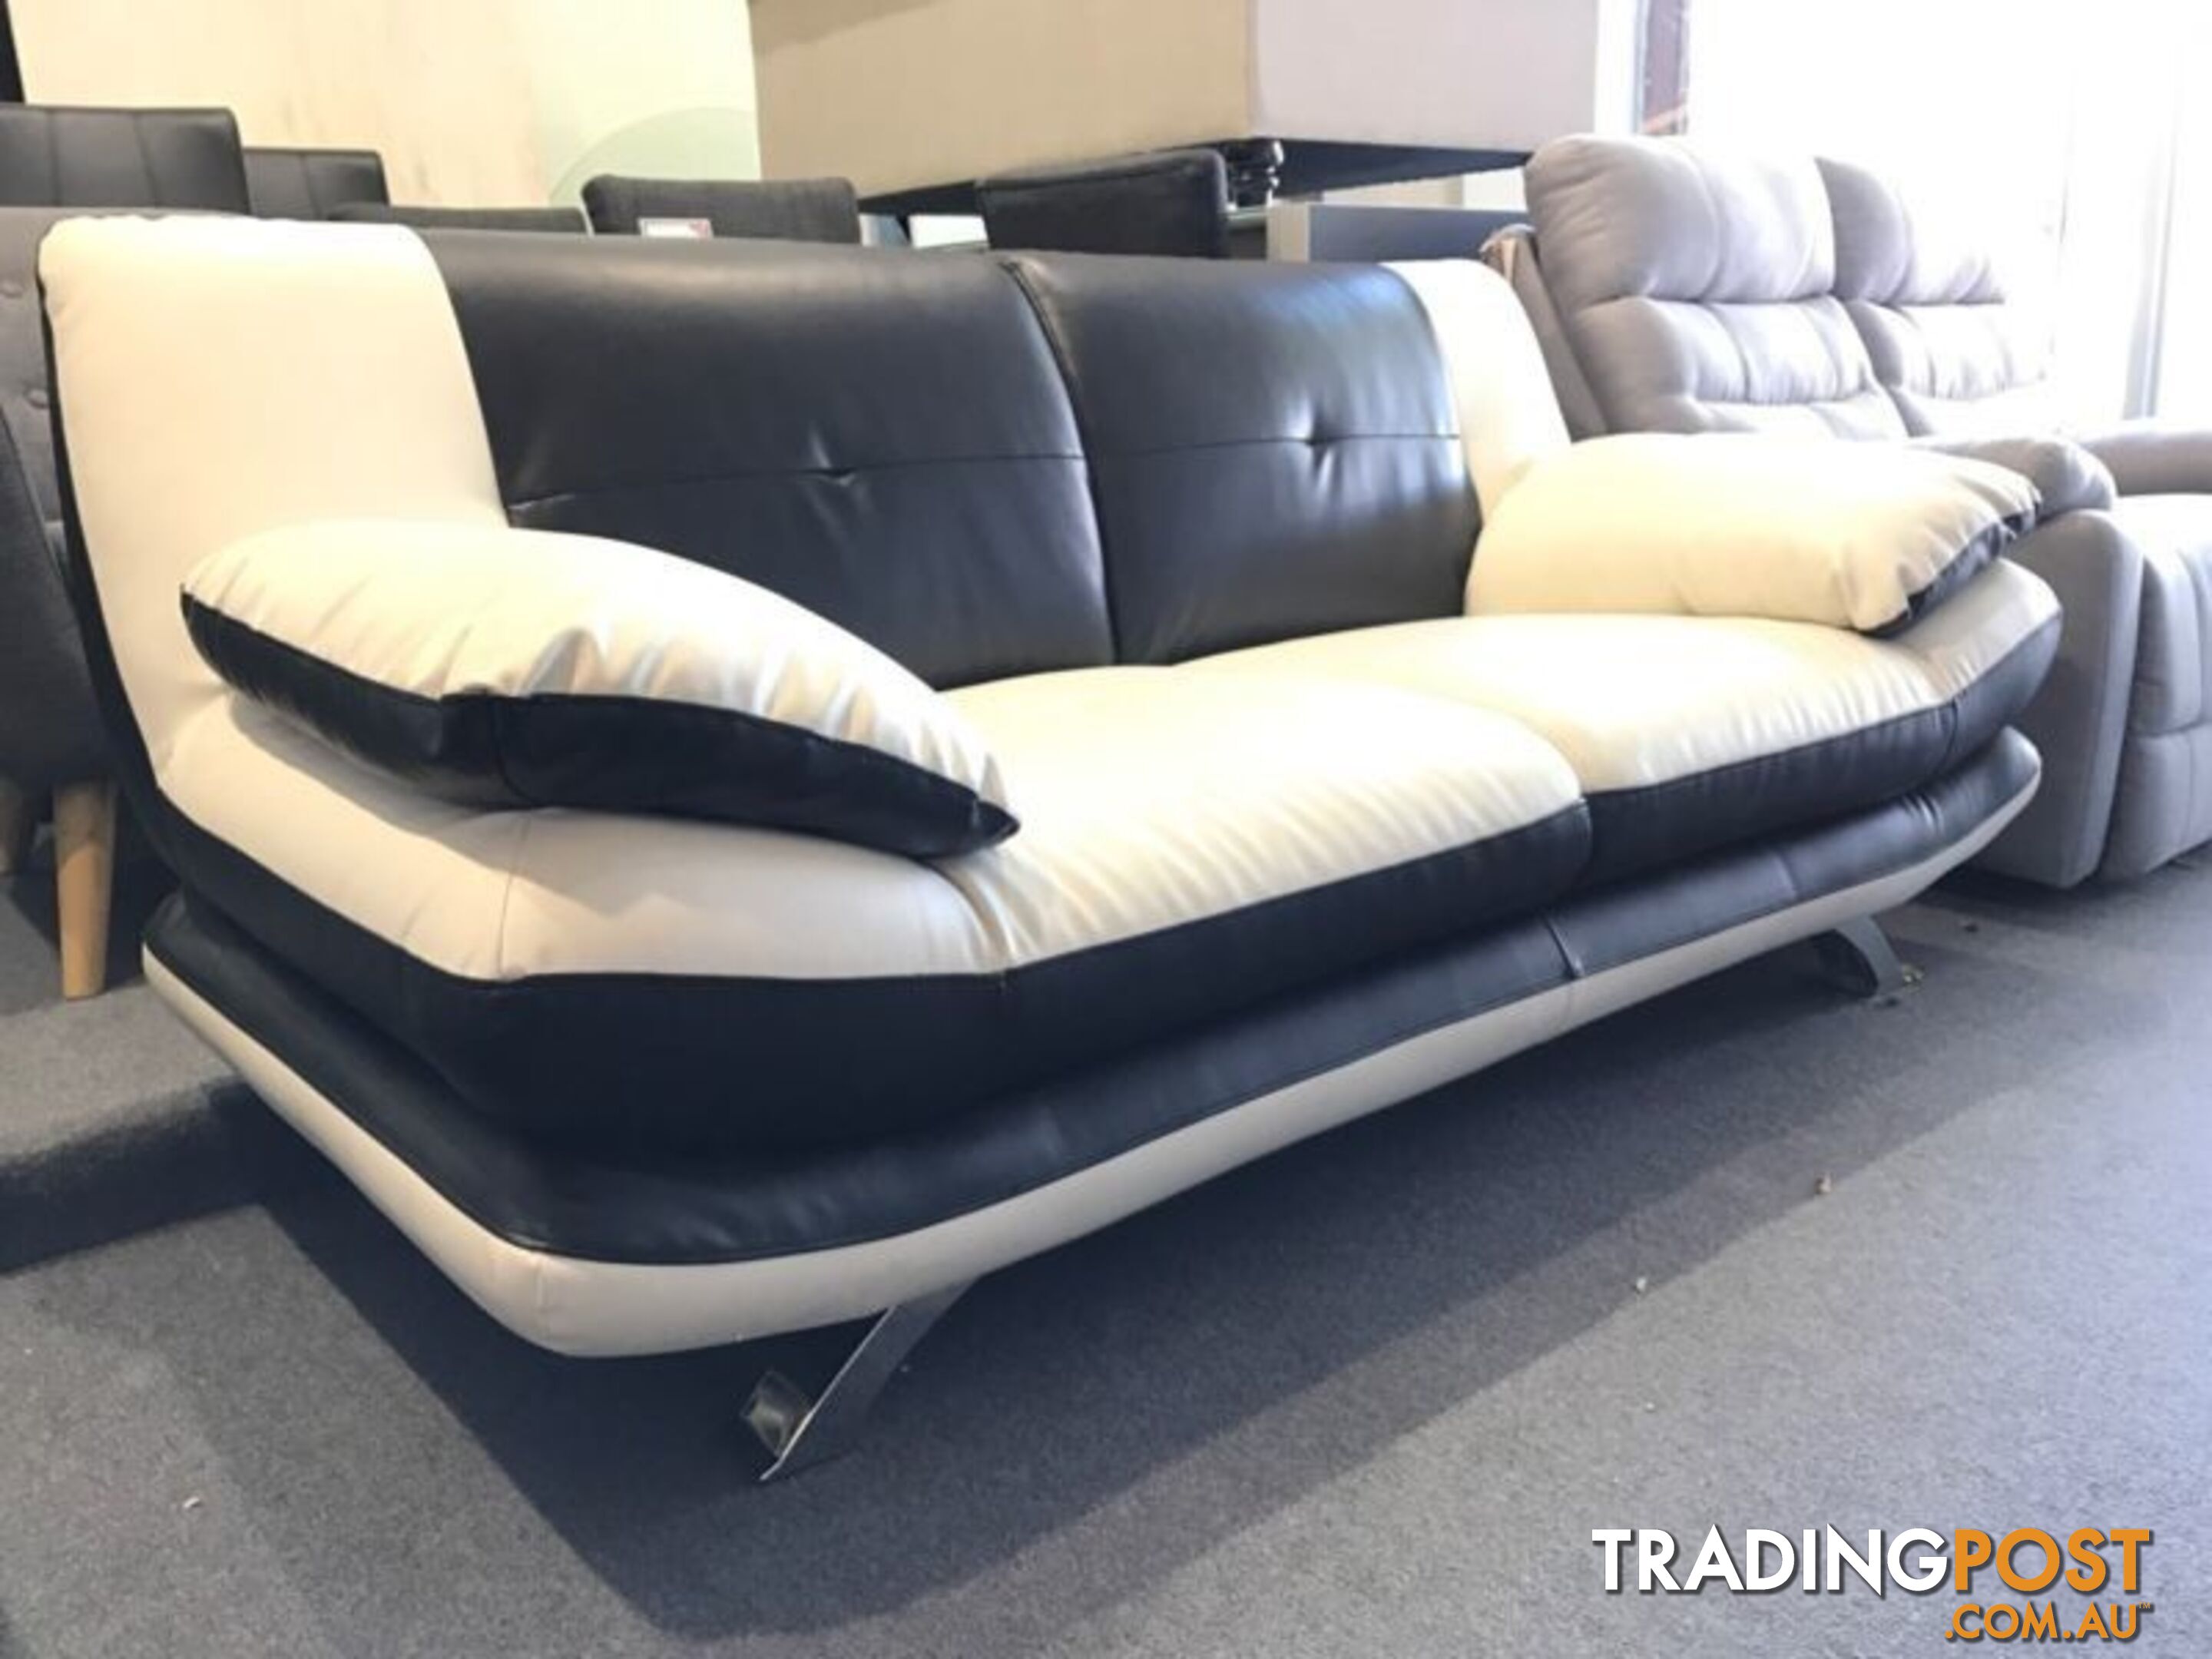 BRAND NEW SOFAS ON SALE - 70% OFF RETAIL STORE PRICES, BE QUICK!